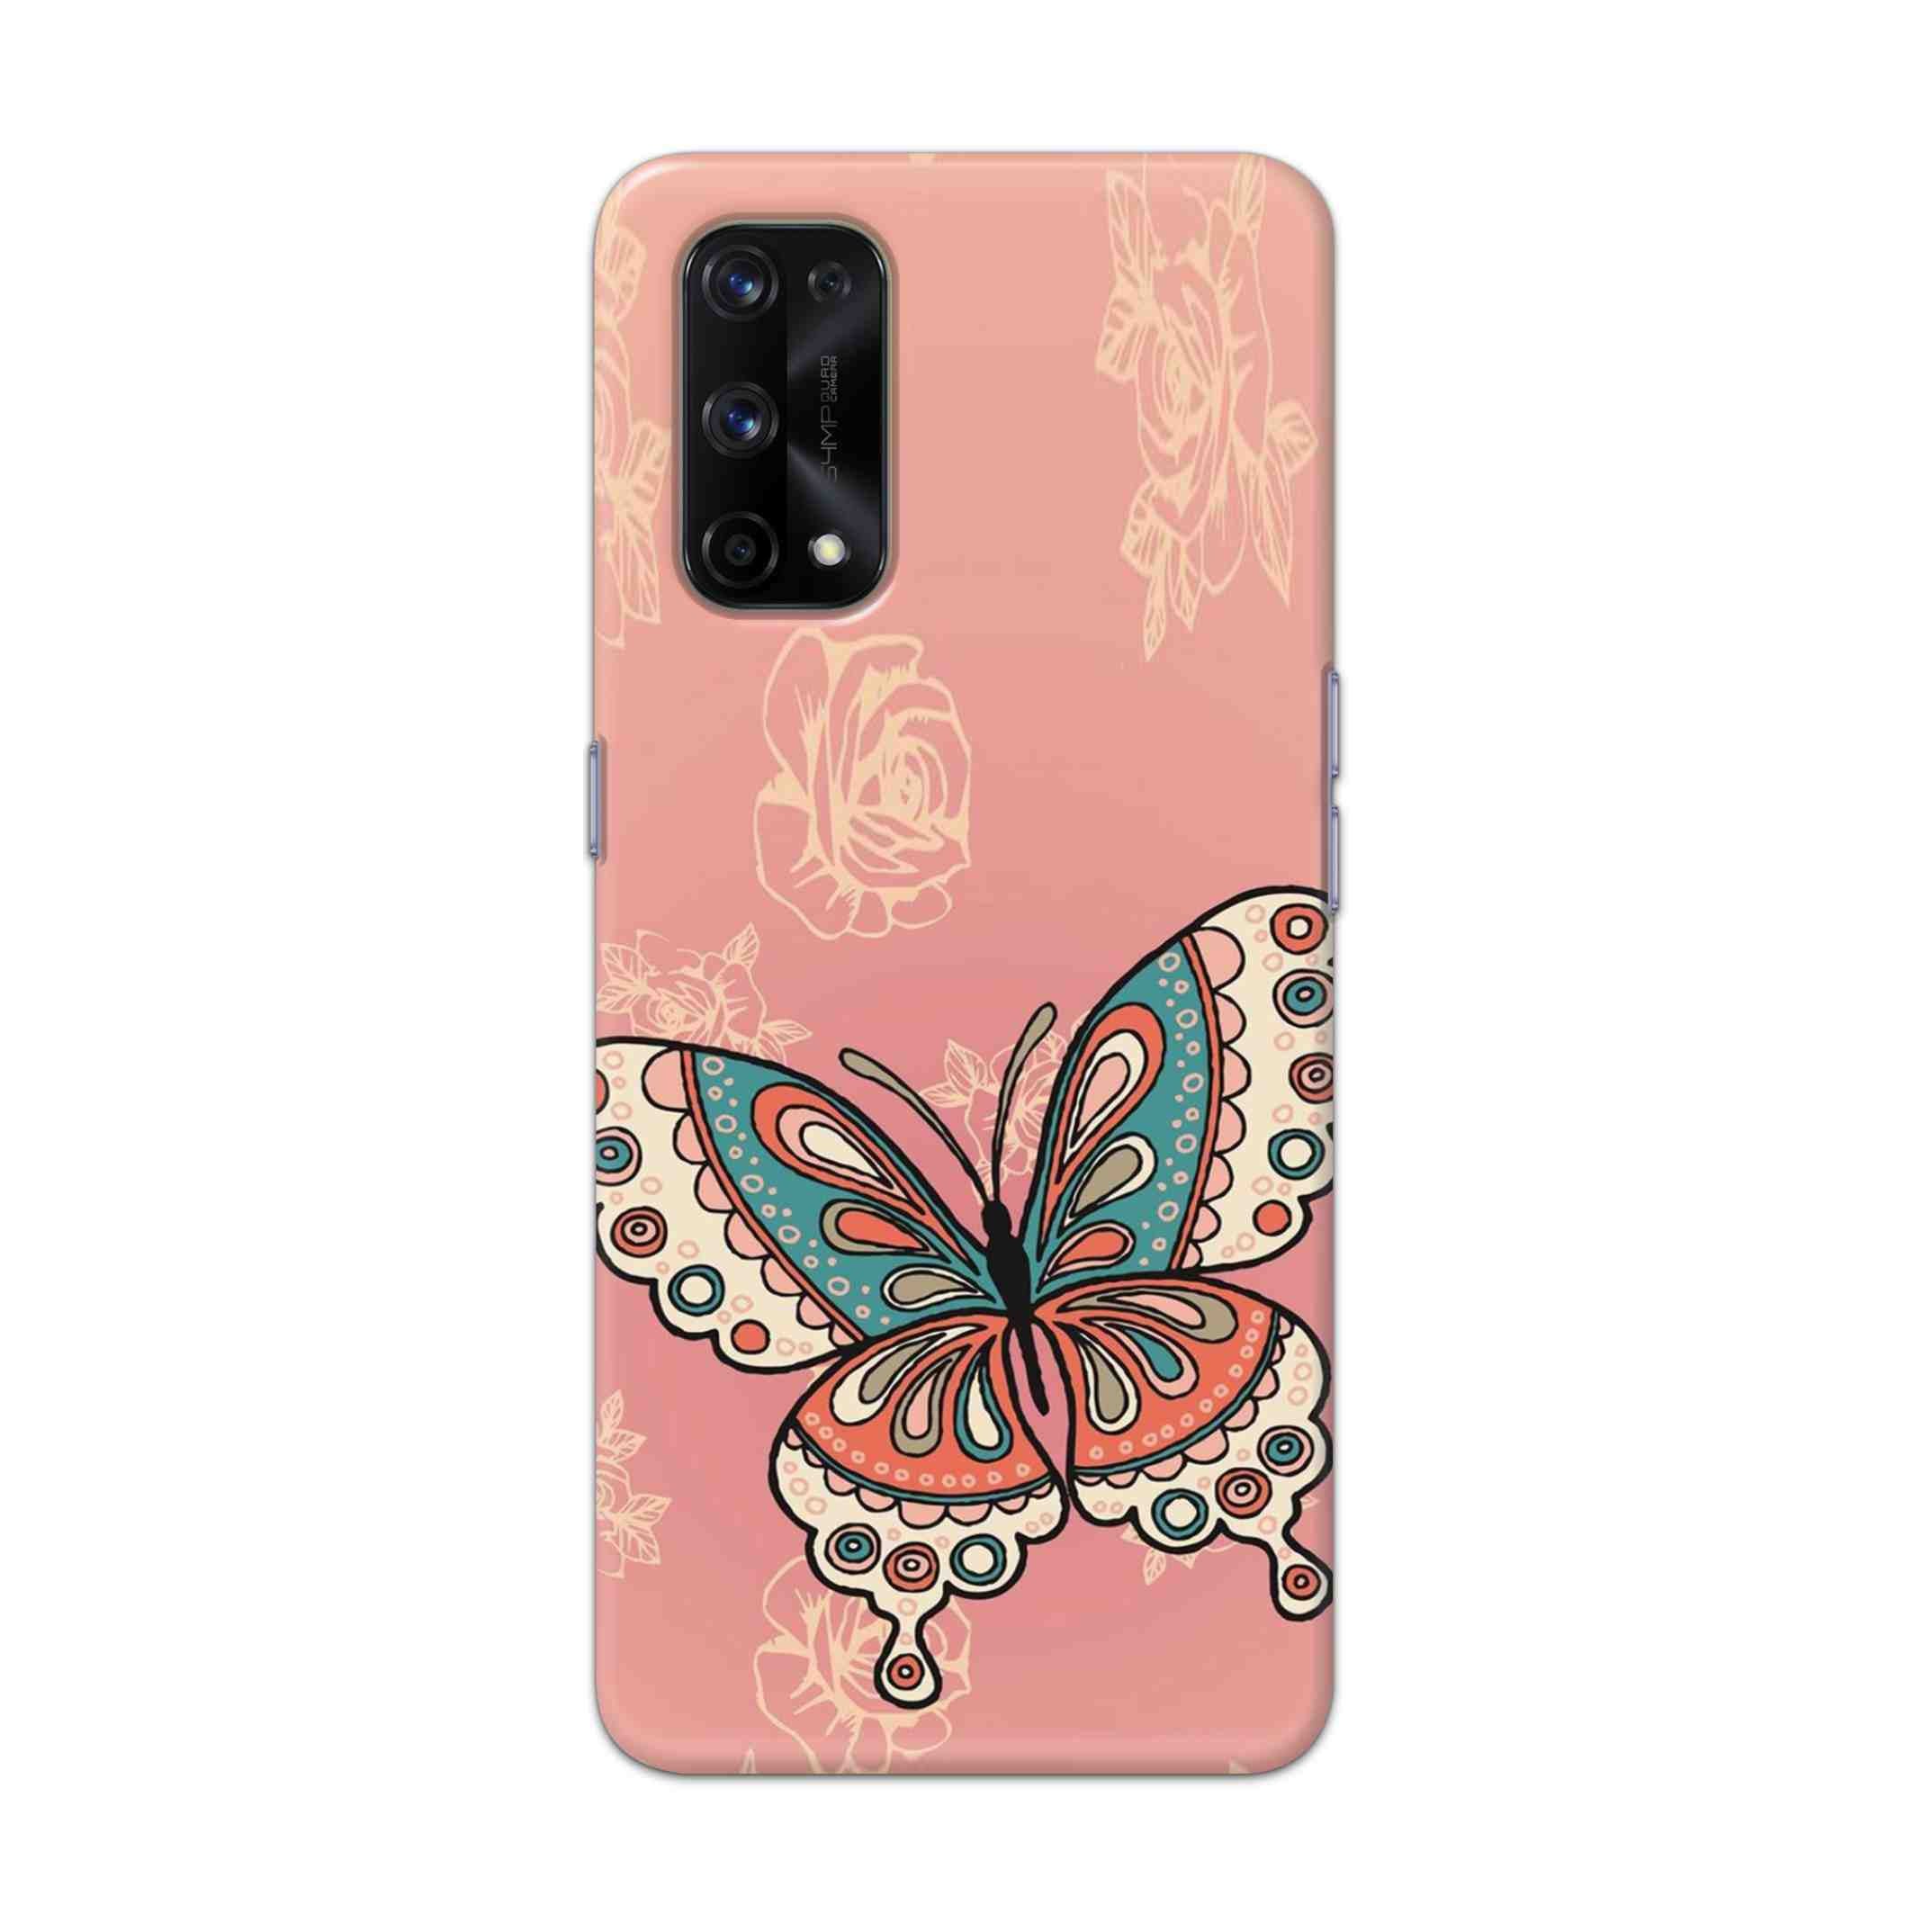 Buy Butterfly Hard Back Mobile Phone Case Cover For Realme X7 Pro Online